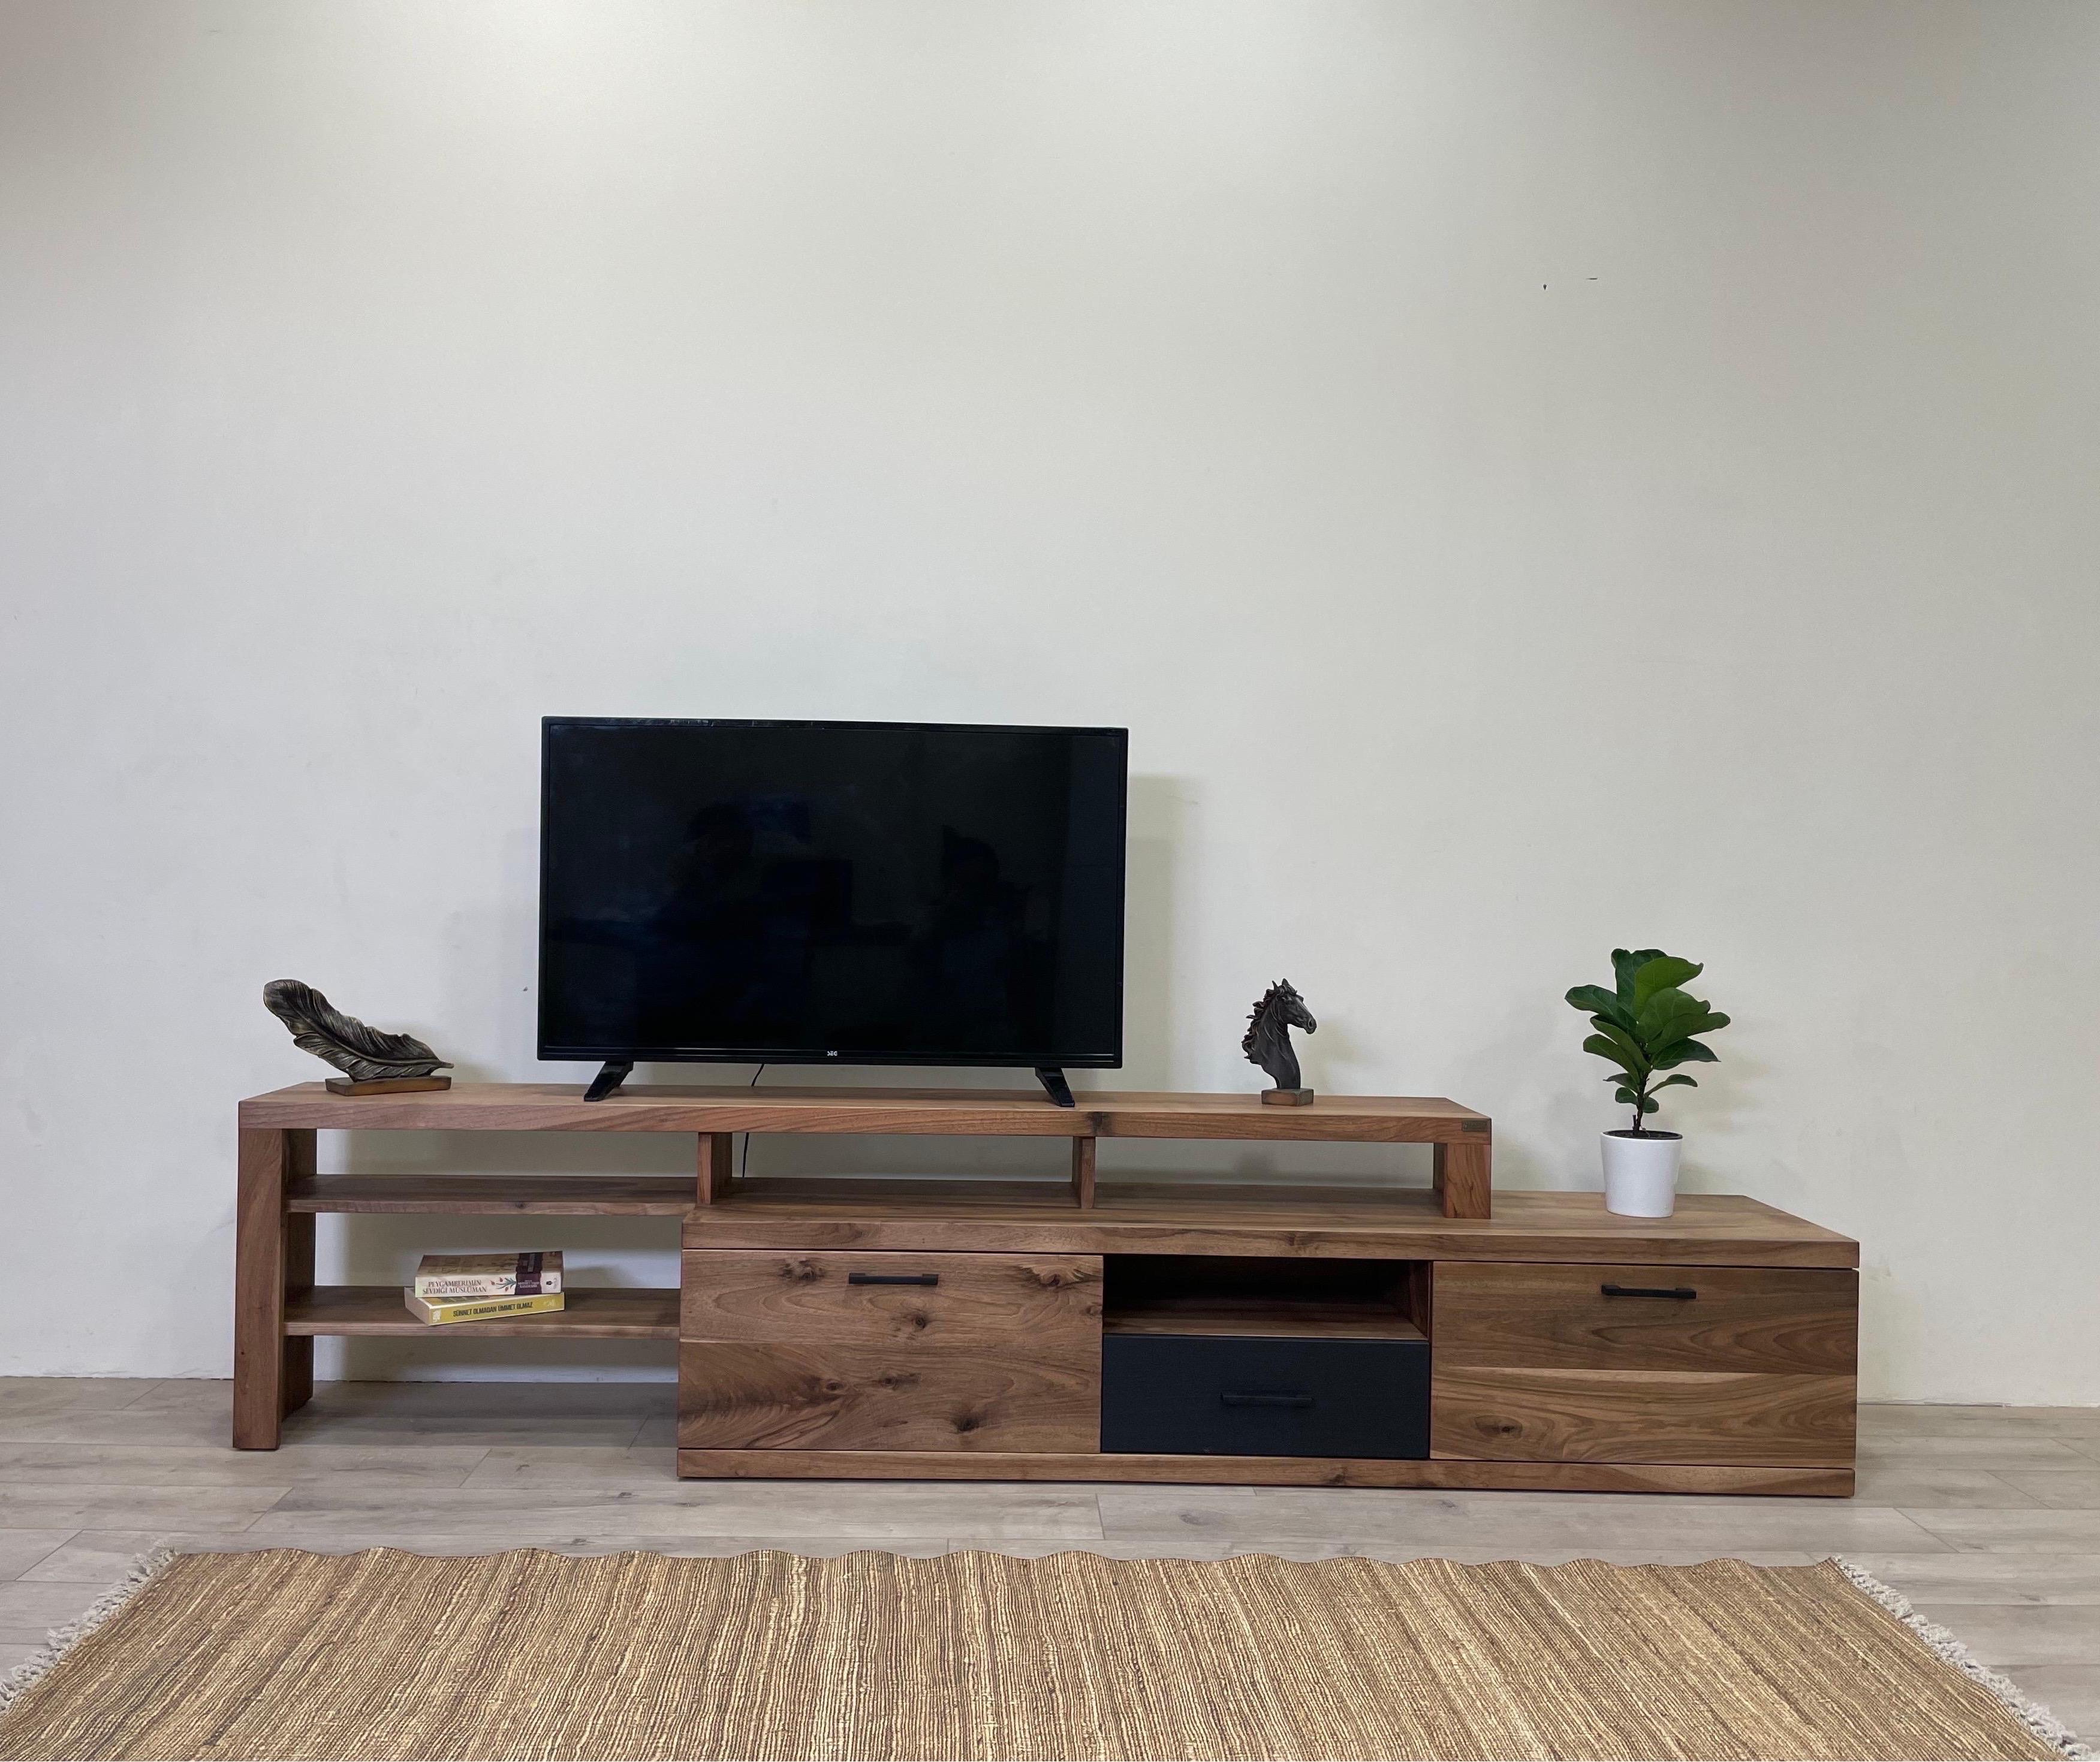 Sideboards are multifunctional furniture in our homes. We put our media devices on them and store CDs, books and other stuff in them. In addition they are part of our living room decoration and design. So it's important to pay attention to all of